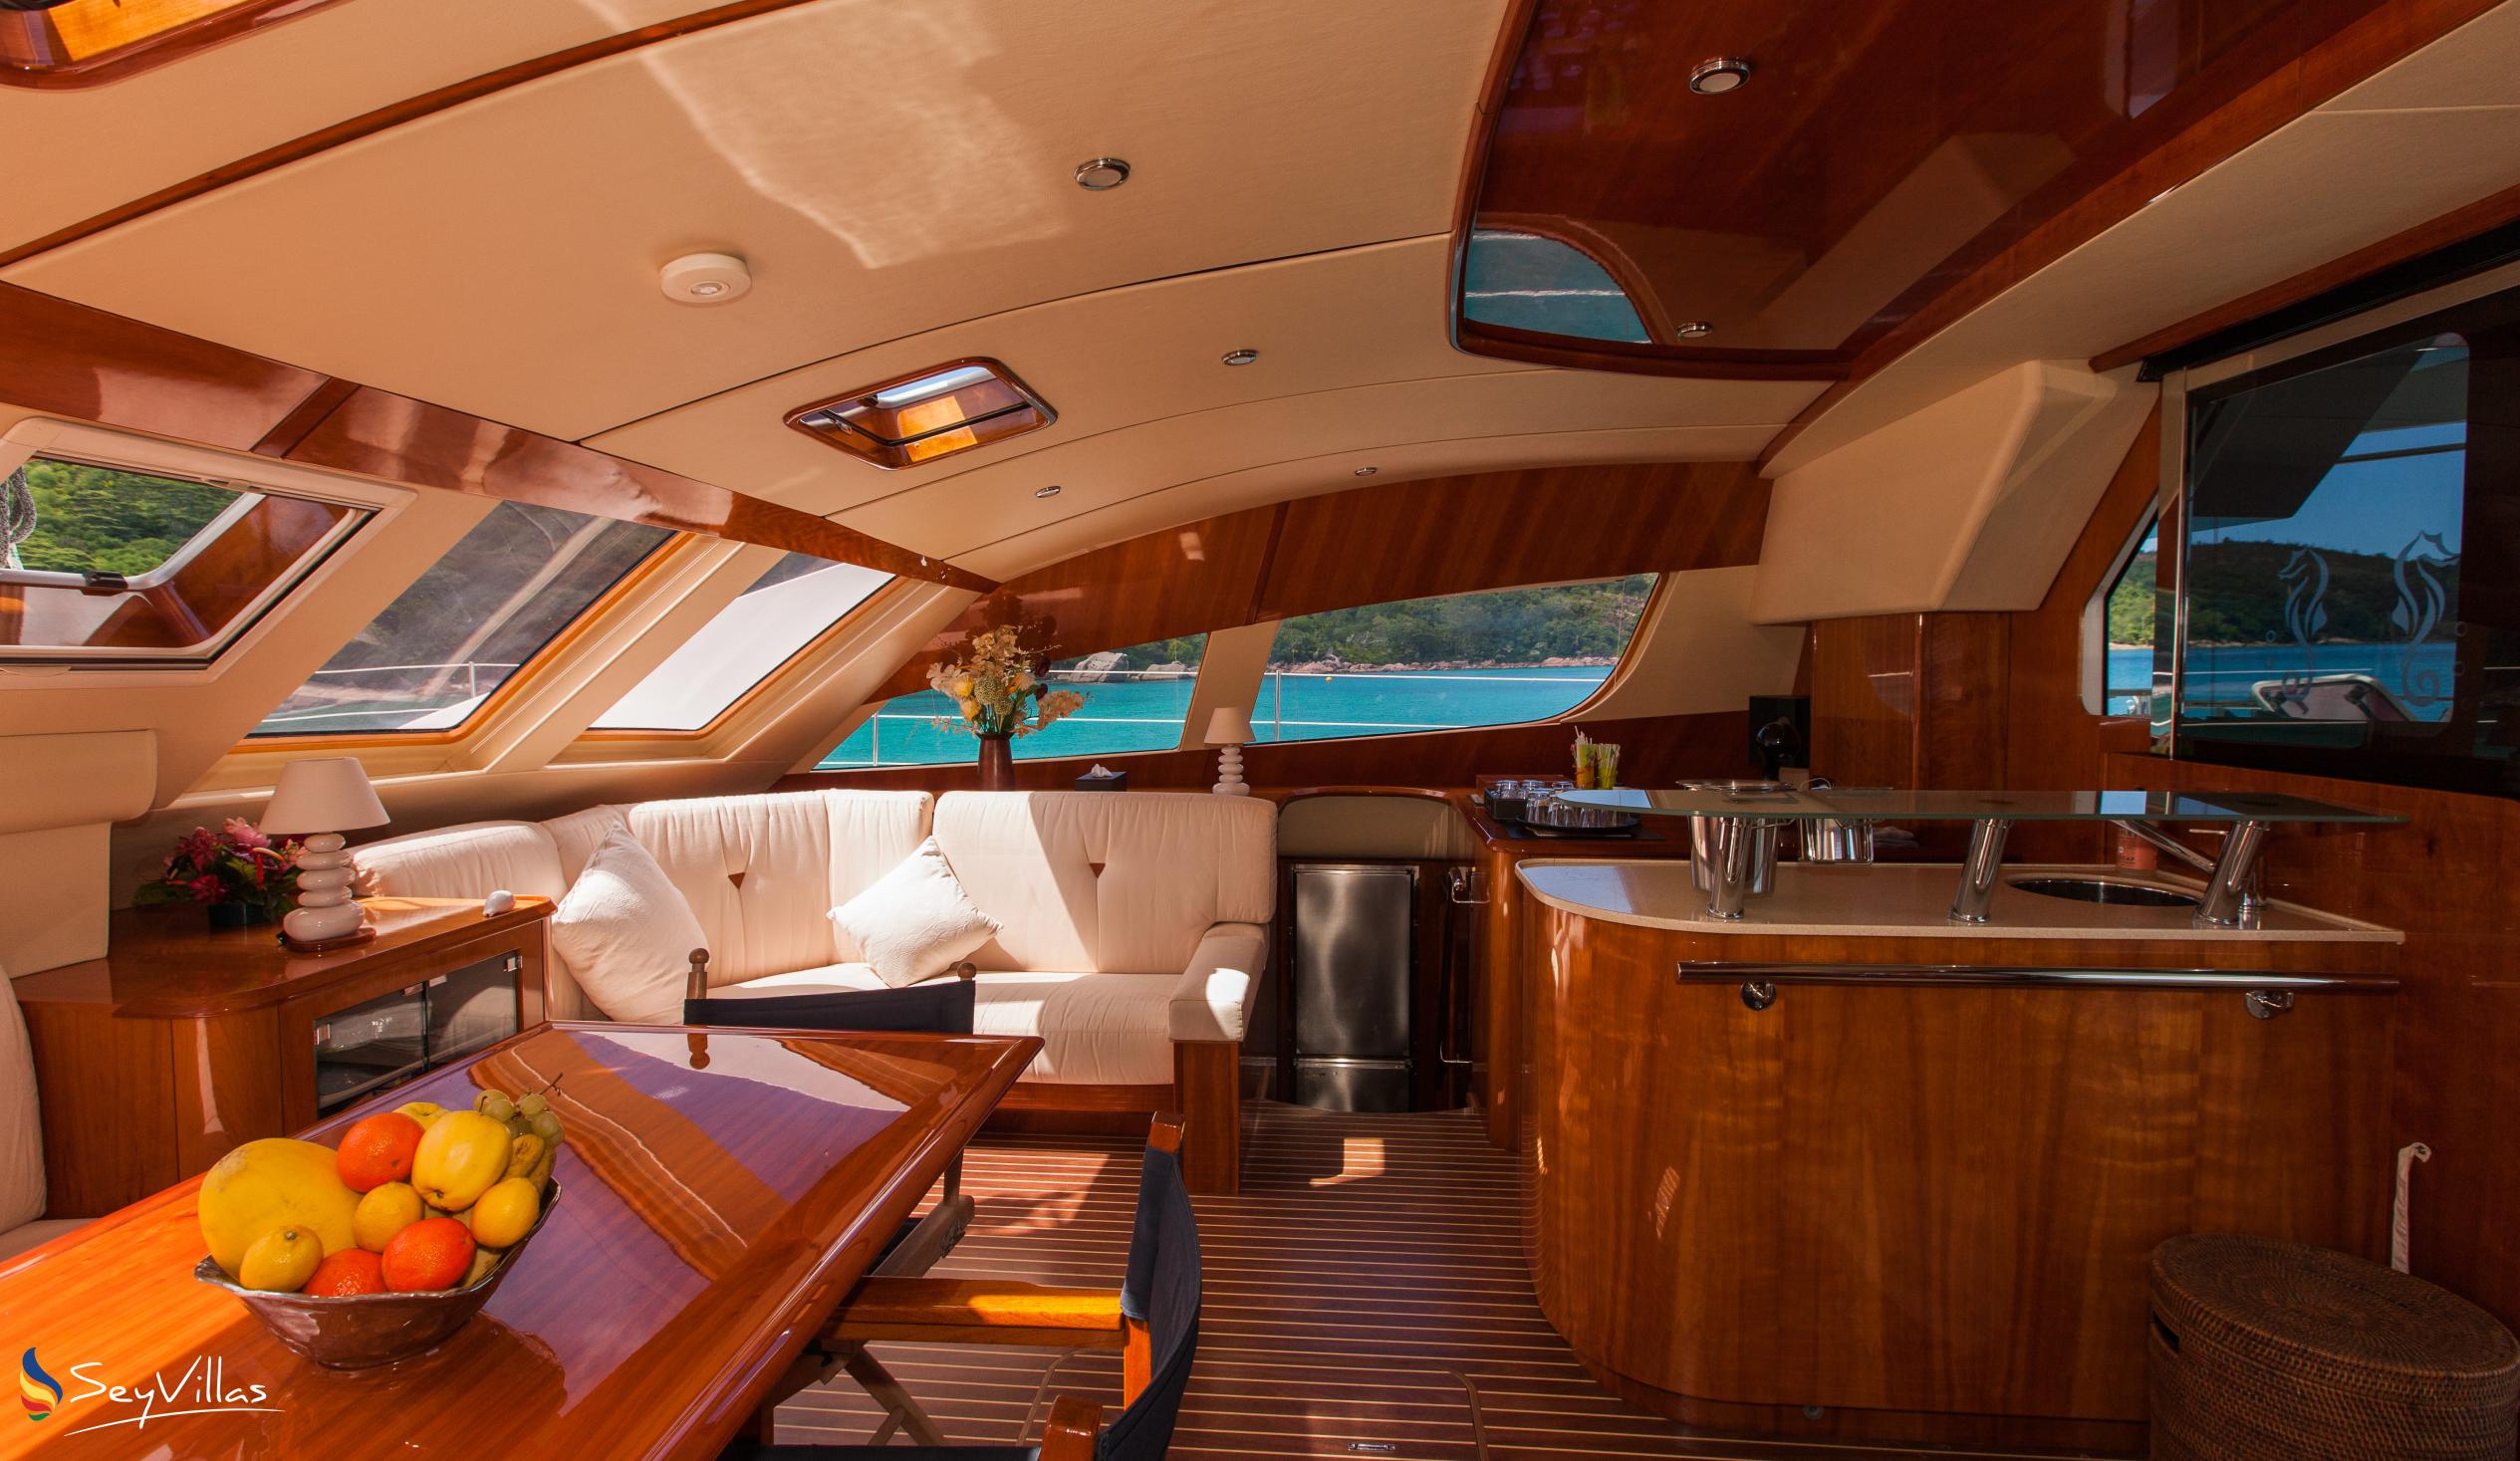 Foto 78: Seyscapes Yacht Charter - Charter Complet Cirrus - Seychelles (Seychelles)